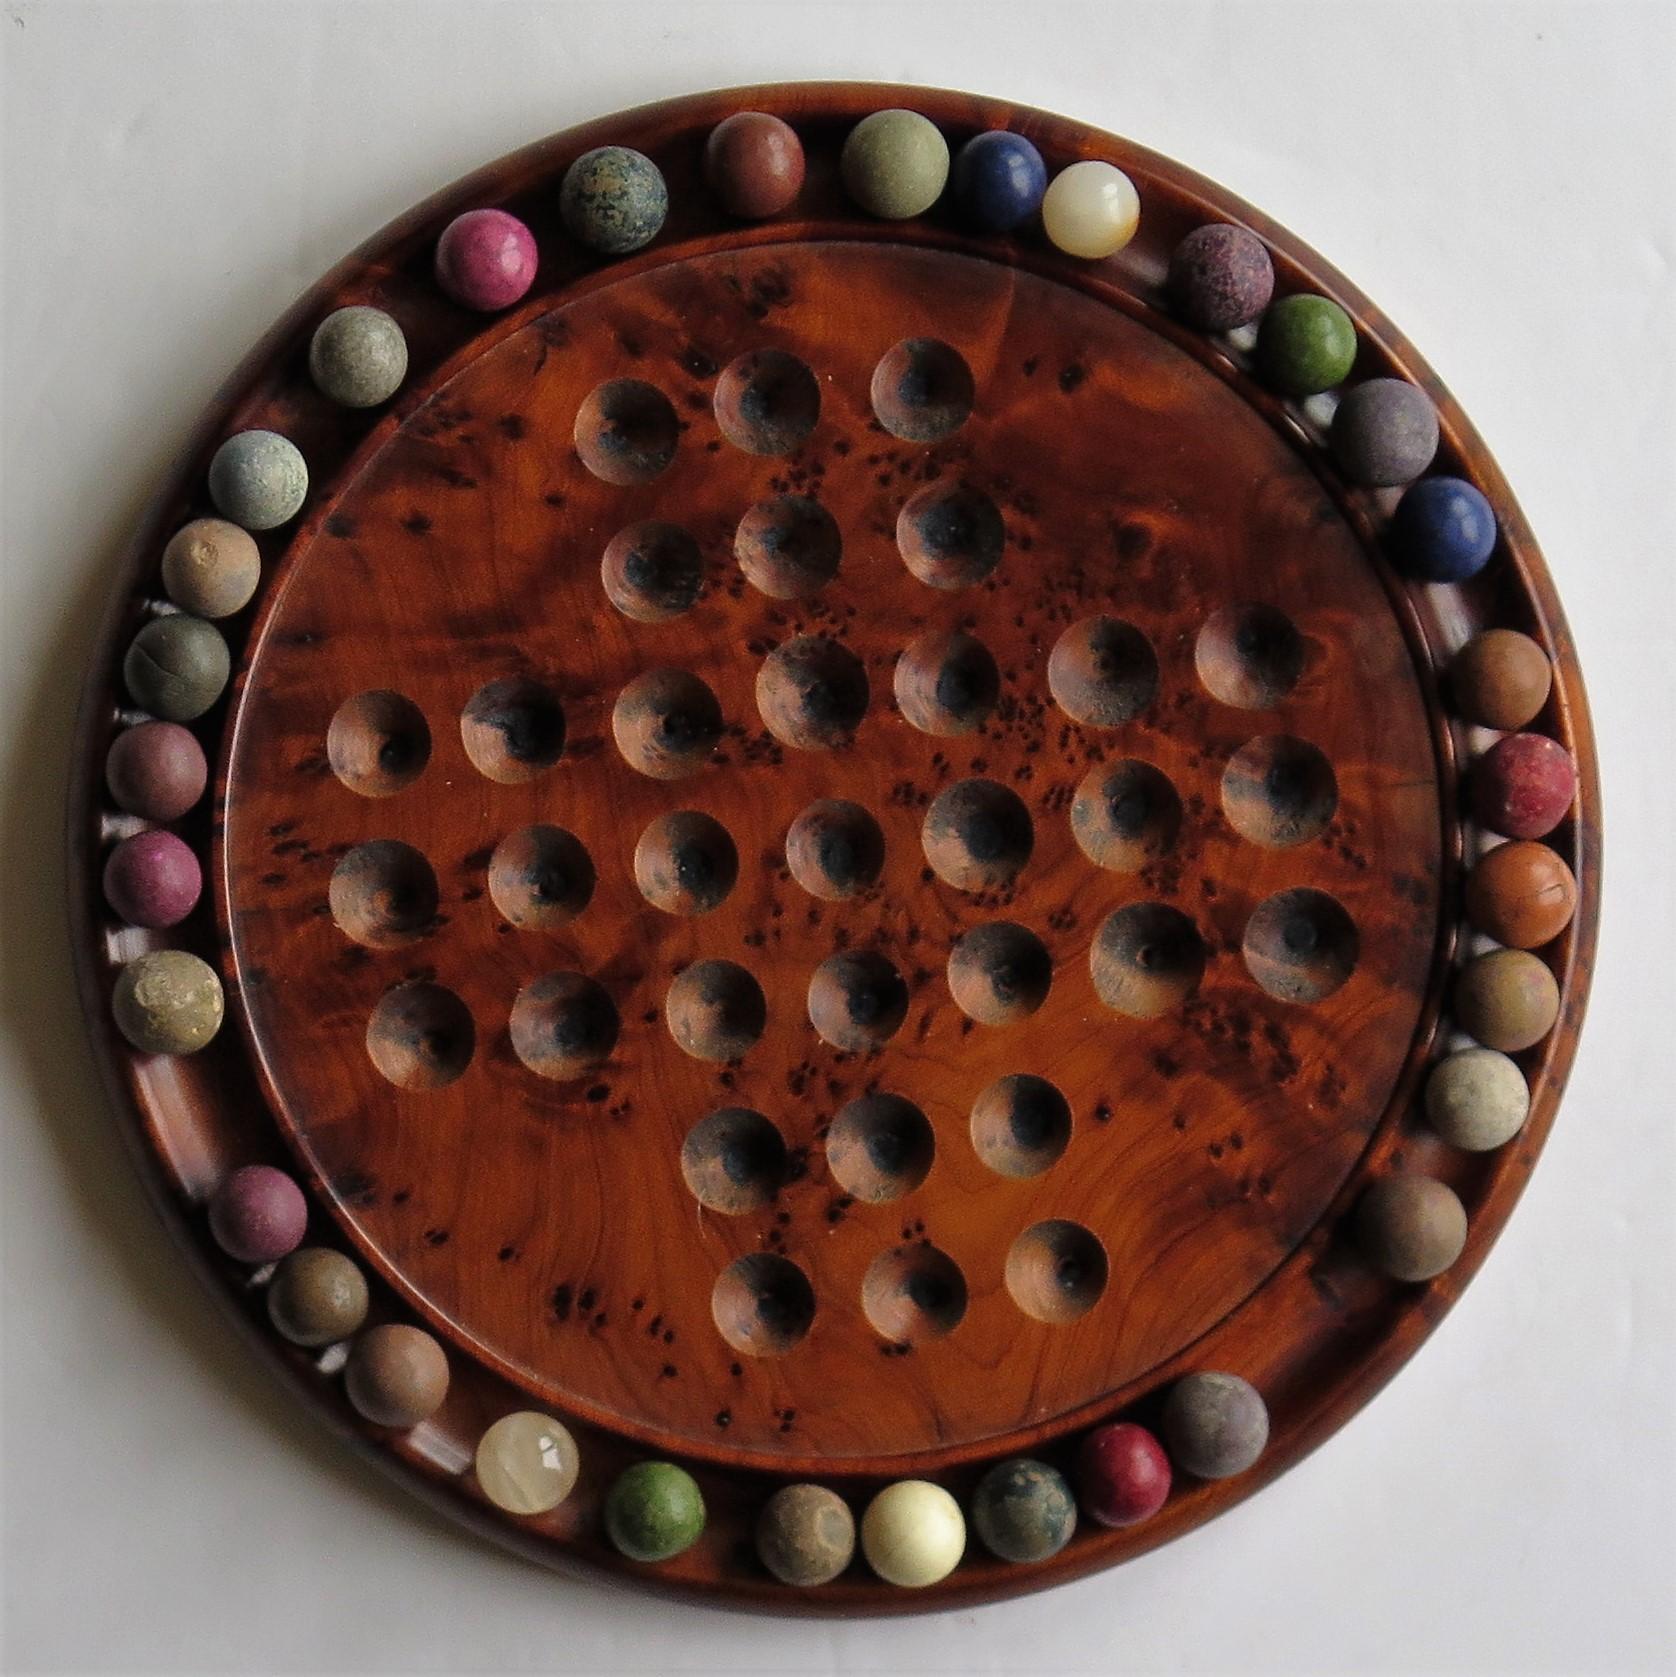 Marble Solitaire Board Game with 33 Early Handmade Stone Marbles, circa 1900 1